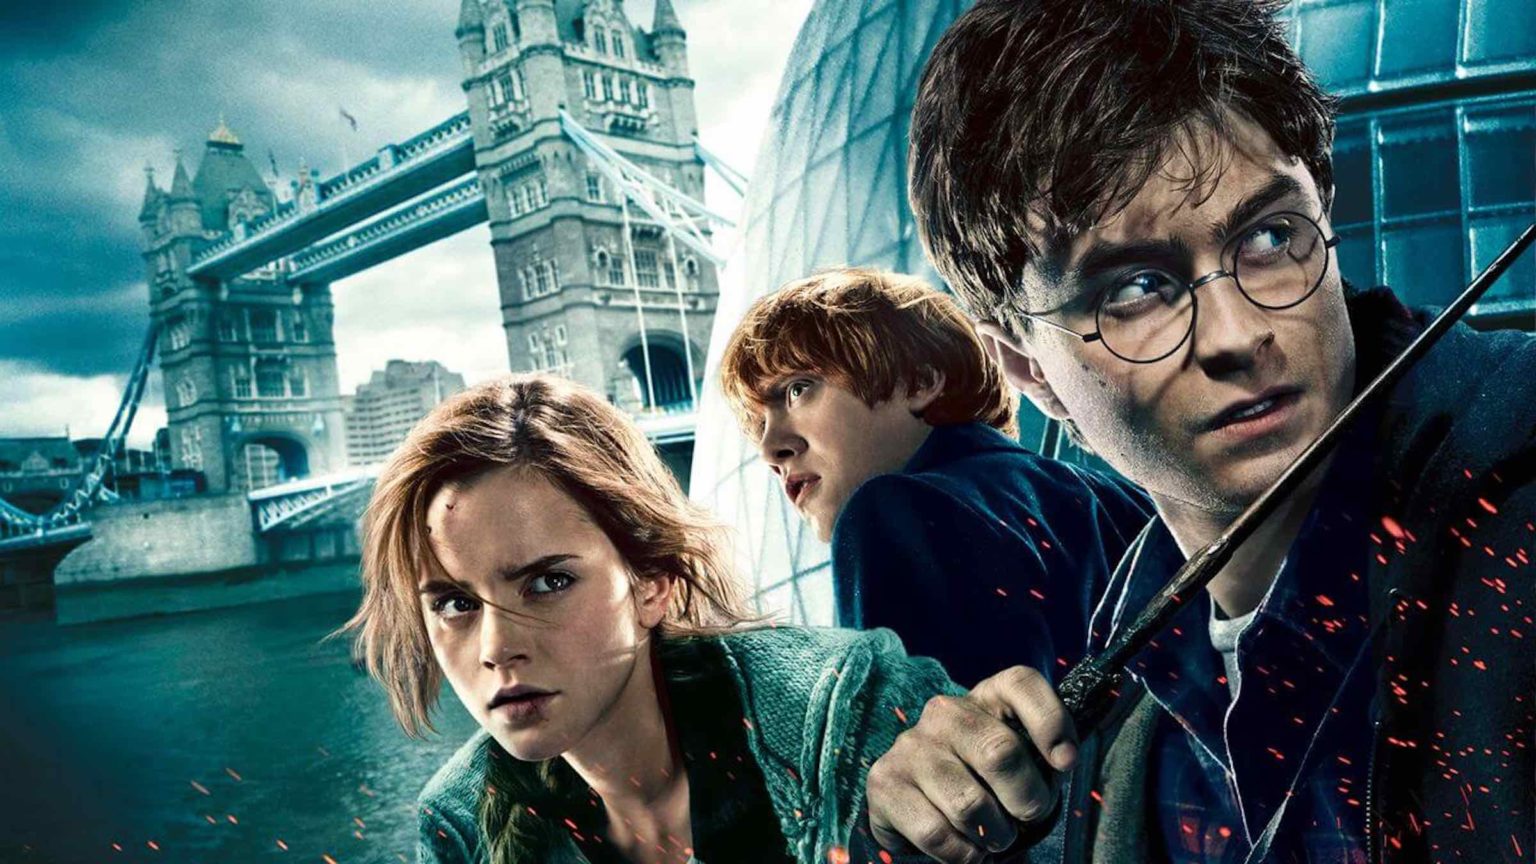 Binged the 'Harry Potter' franchise this quarantine? Join Harry, Hermione, and Ron while taking on our second magical Pottermore quiz.